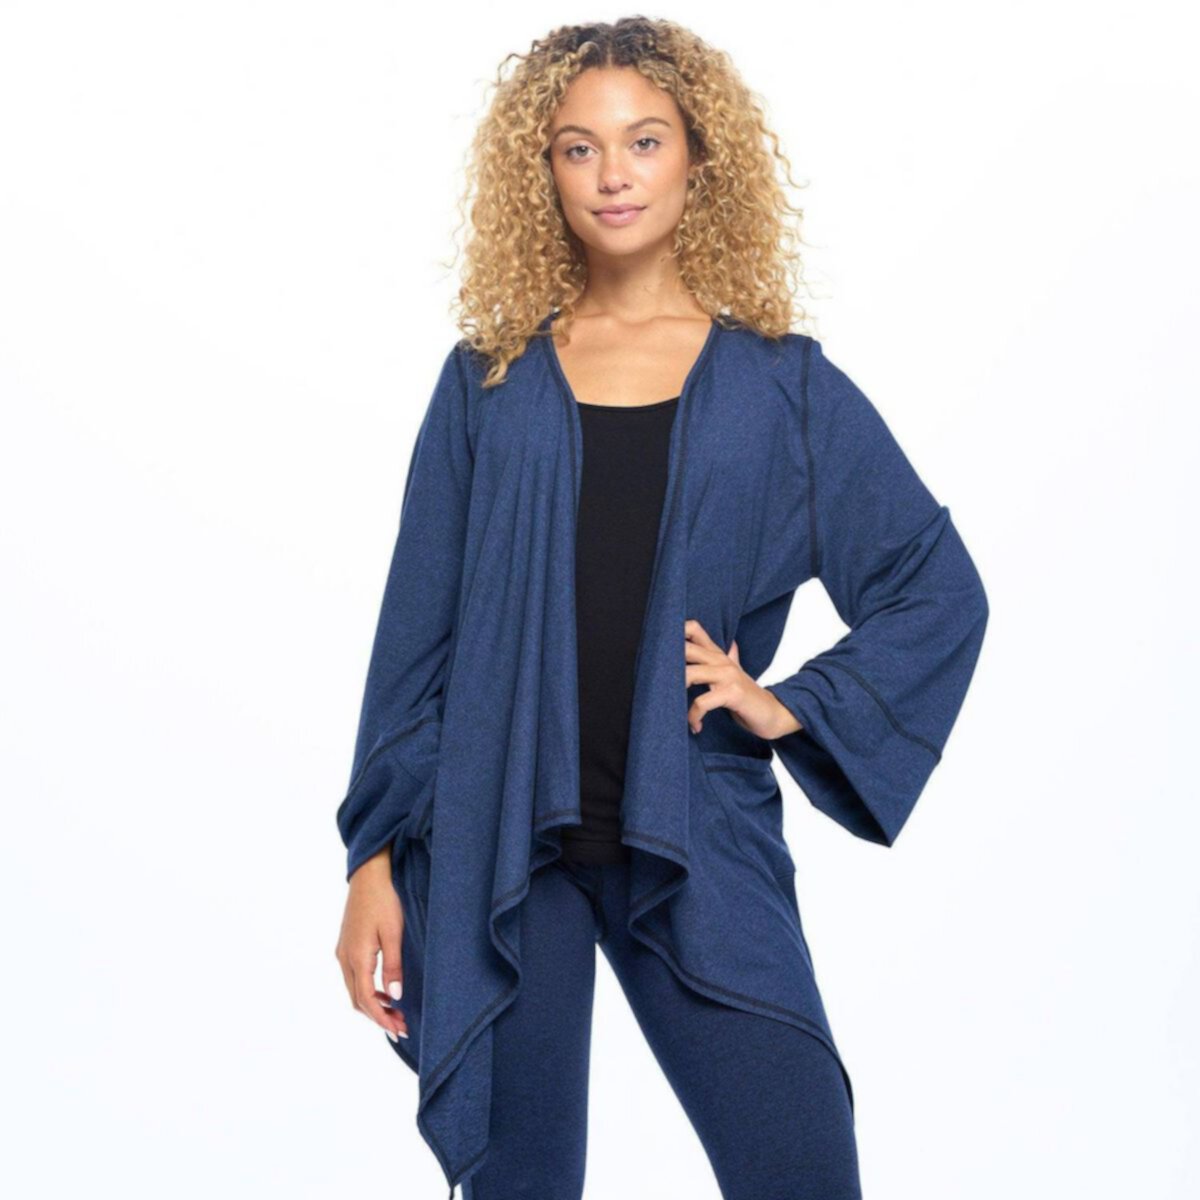 Undersummers by CarrieRae Women's Mix and Match Yoga Cardigan Sweaters-Long Sleeves, Comfortable, Side Pockets & Open Front Undersummers